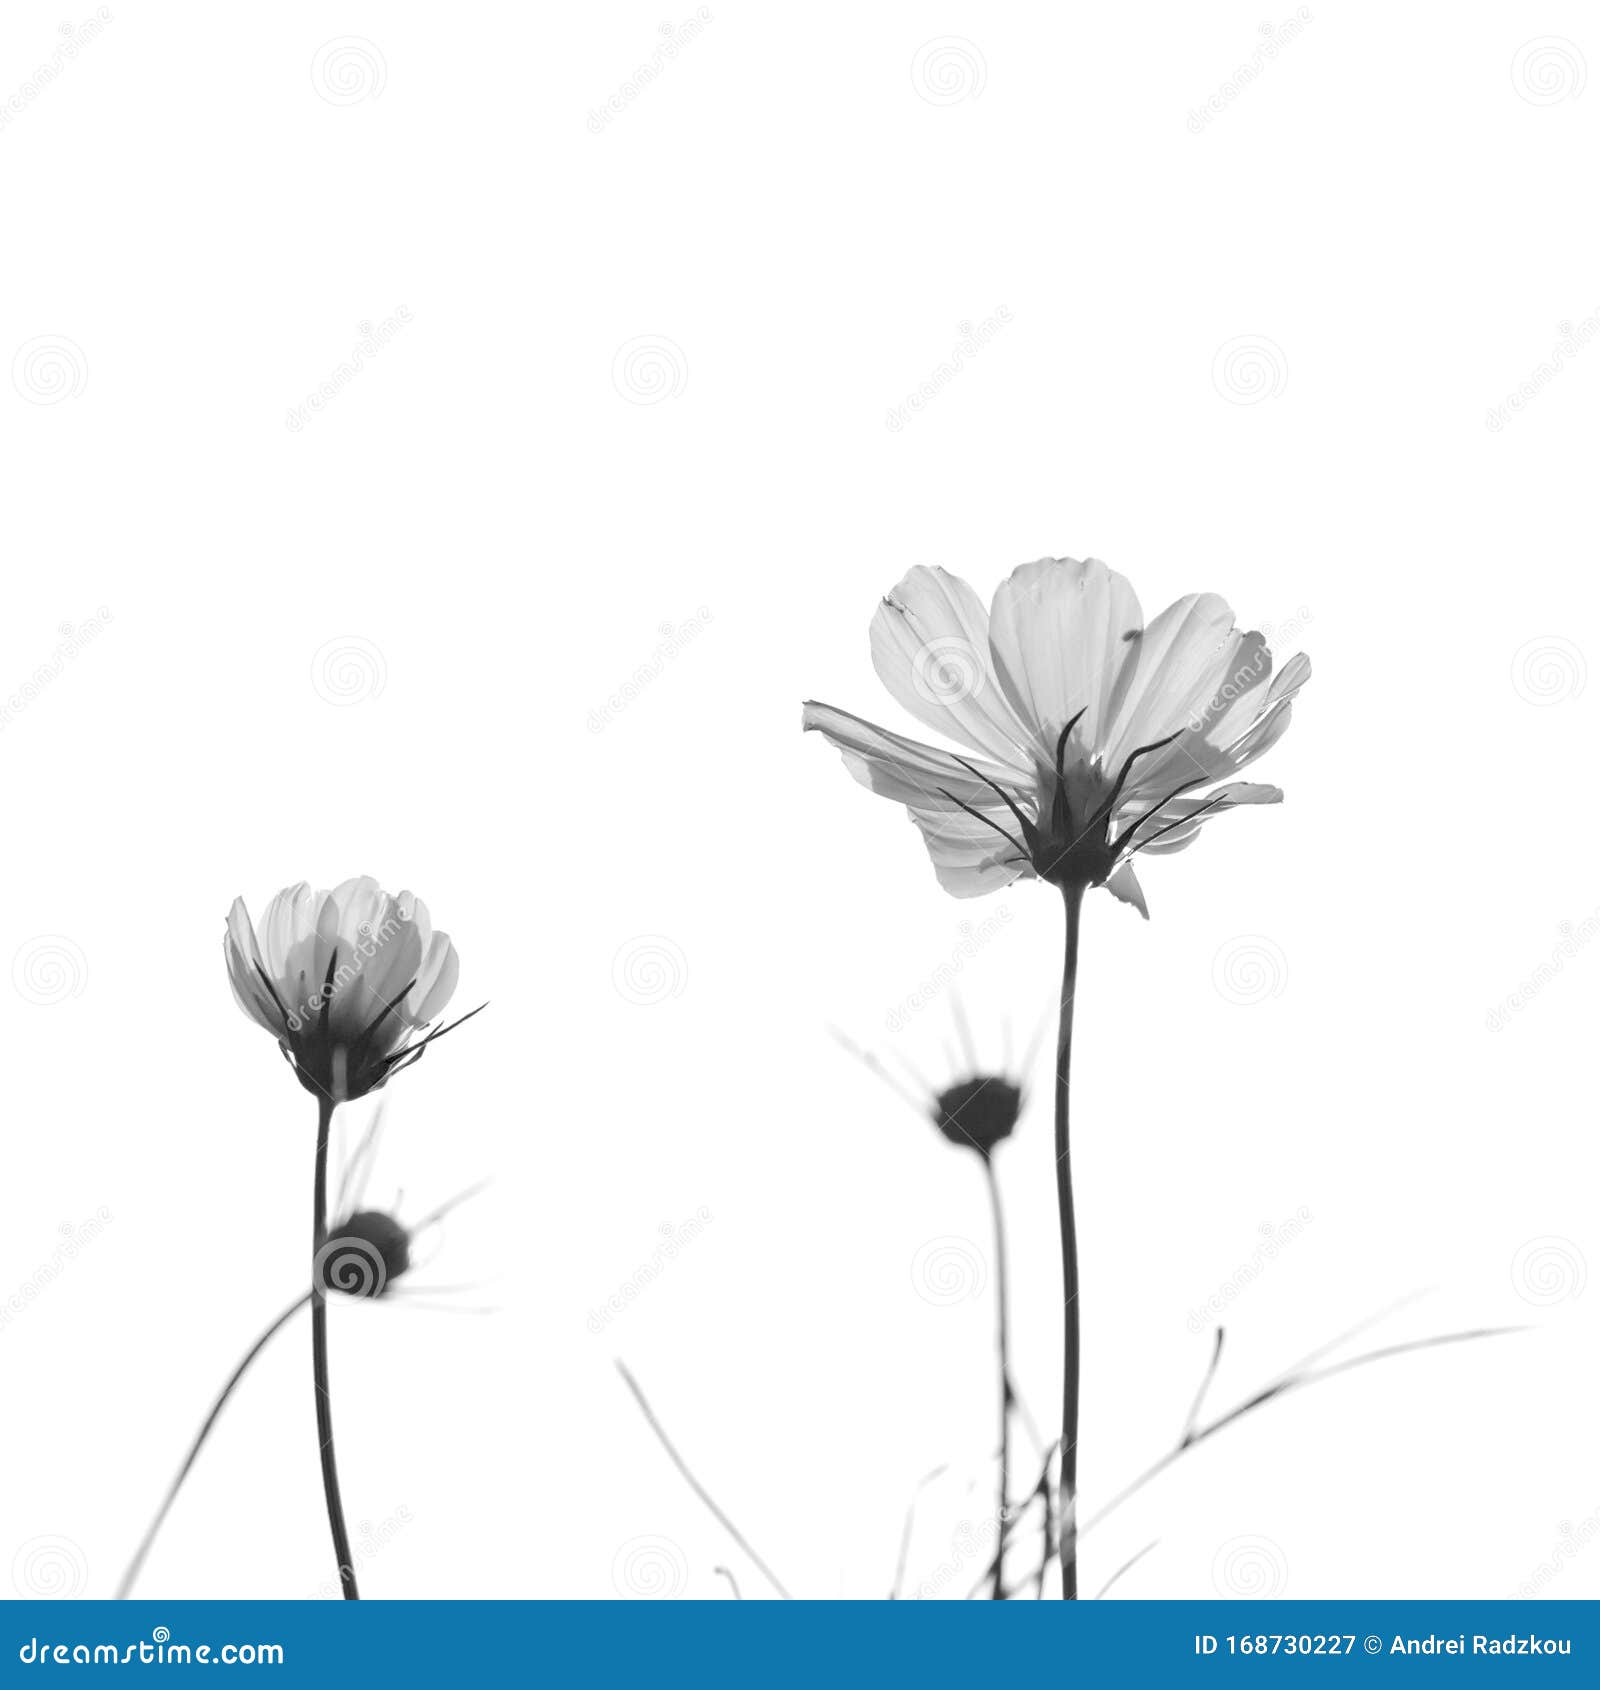 Cosmos Flowers Only Minimal Black And White Photo Stock Image Image Of Nature Delicate 168730227